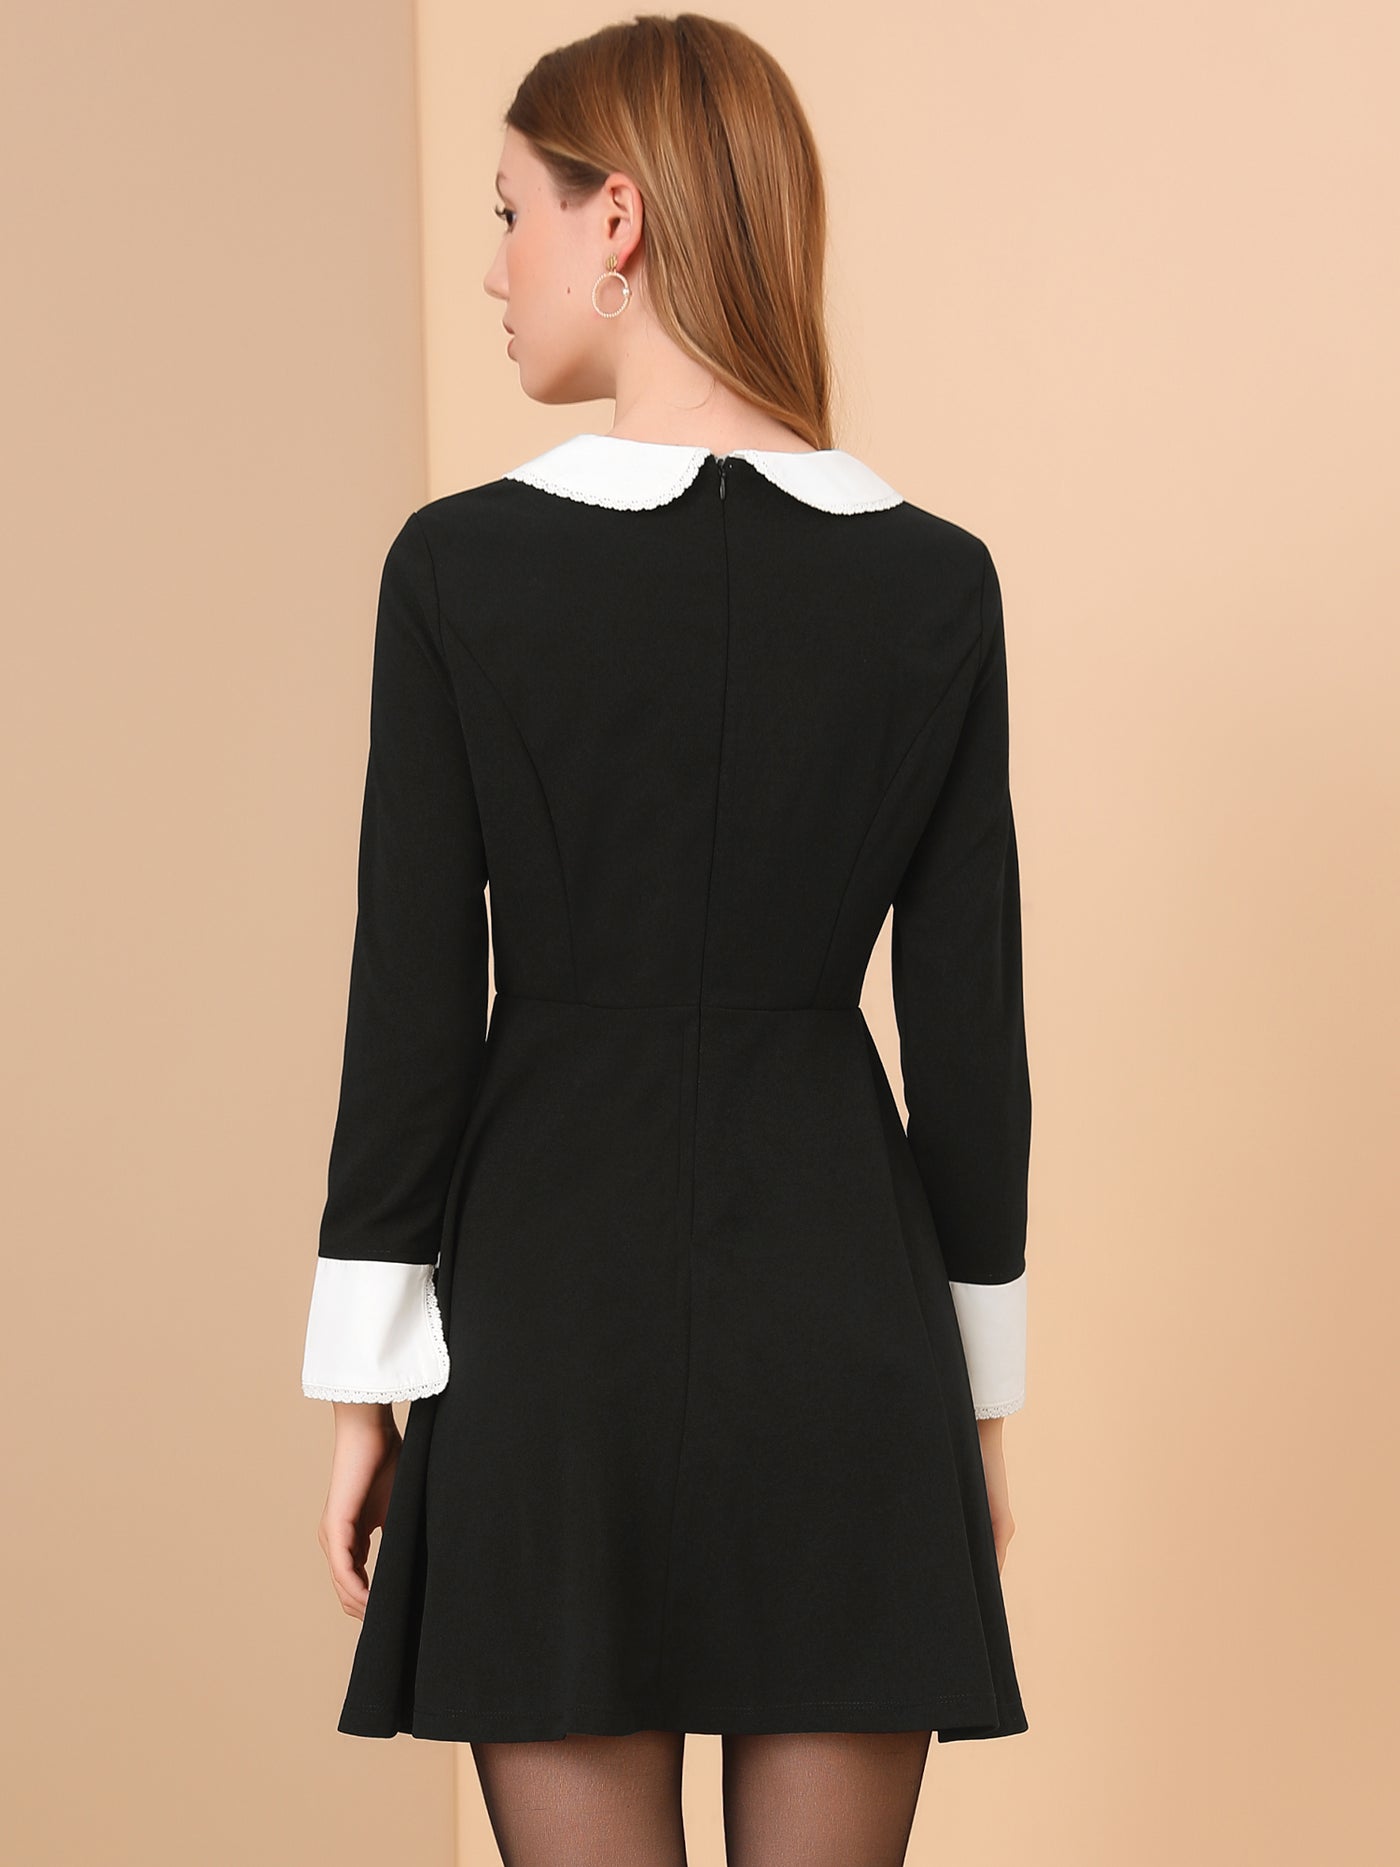 Allegra K Long Sleeve Peter Pan Collar Christmas Cute Fit and Flare Dress